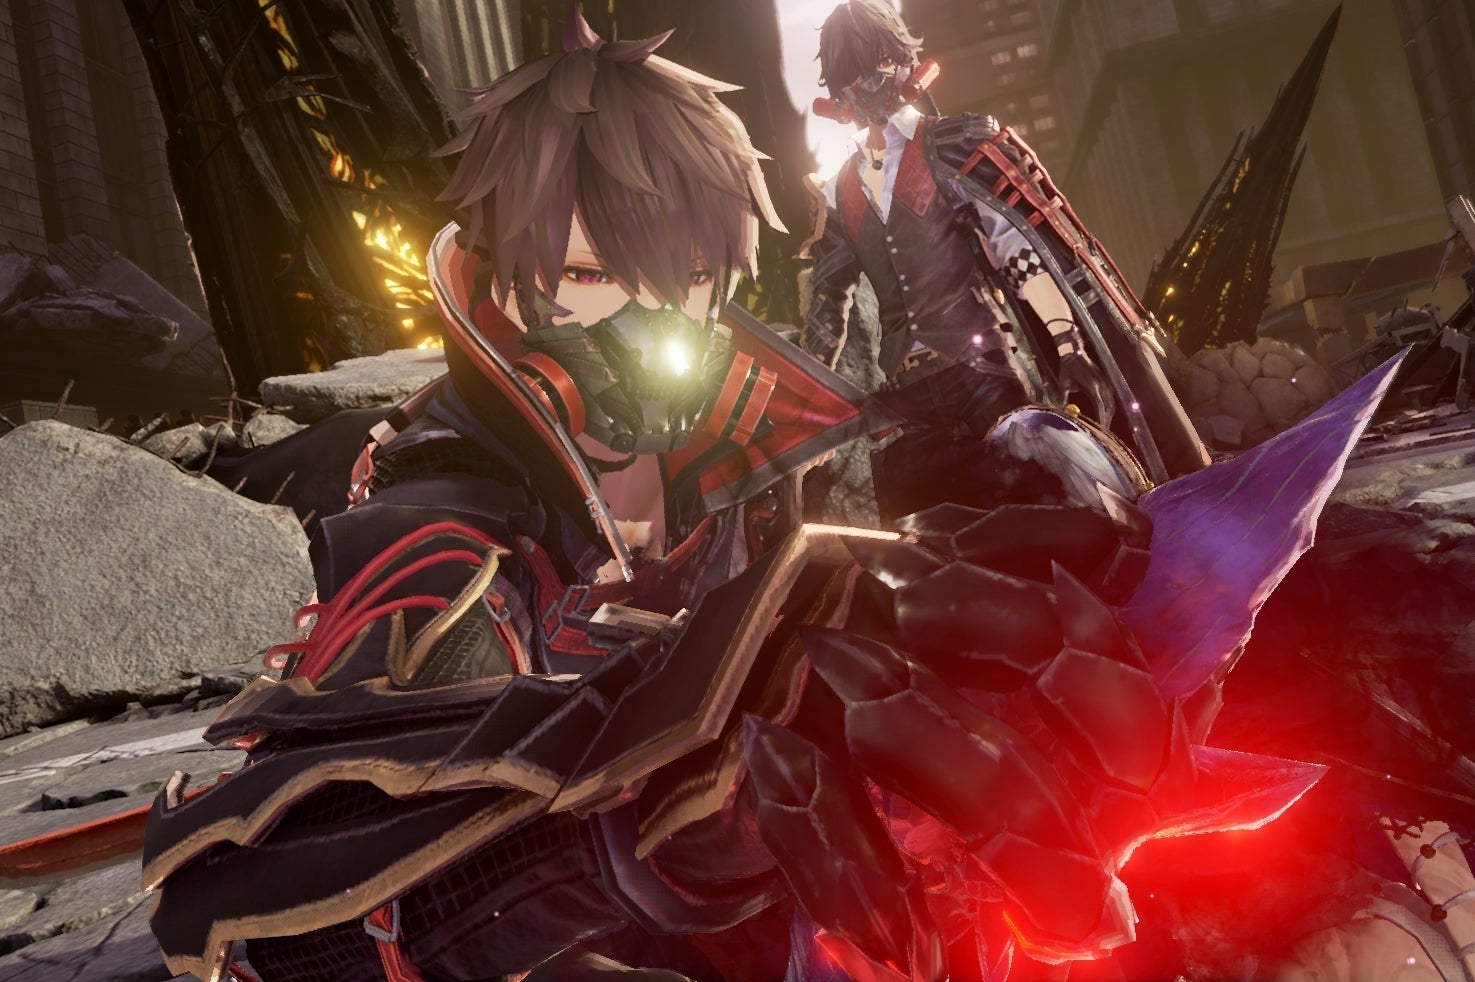 Code Vein review a deeply flawed anime Soulslike with hidden potential   VG247